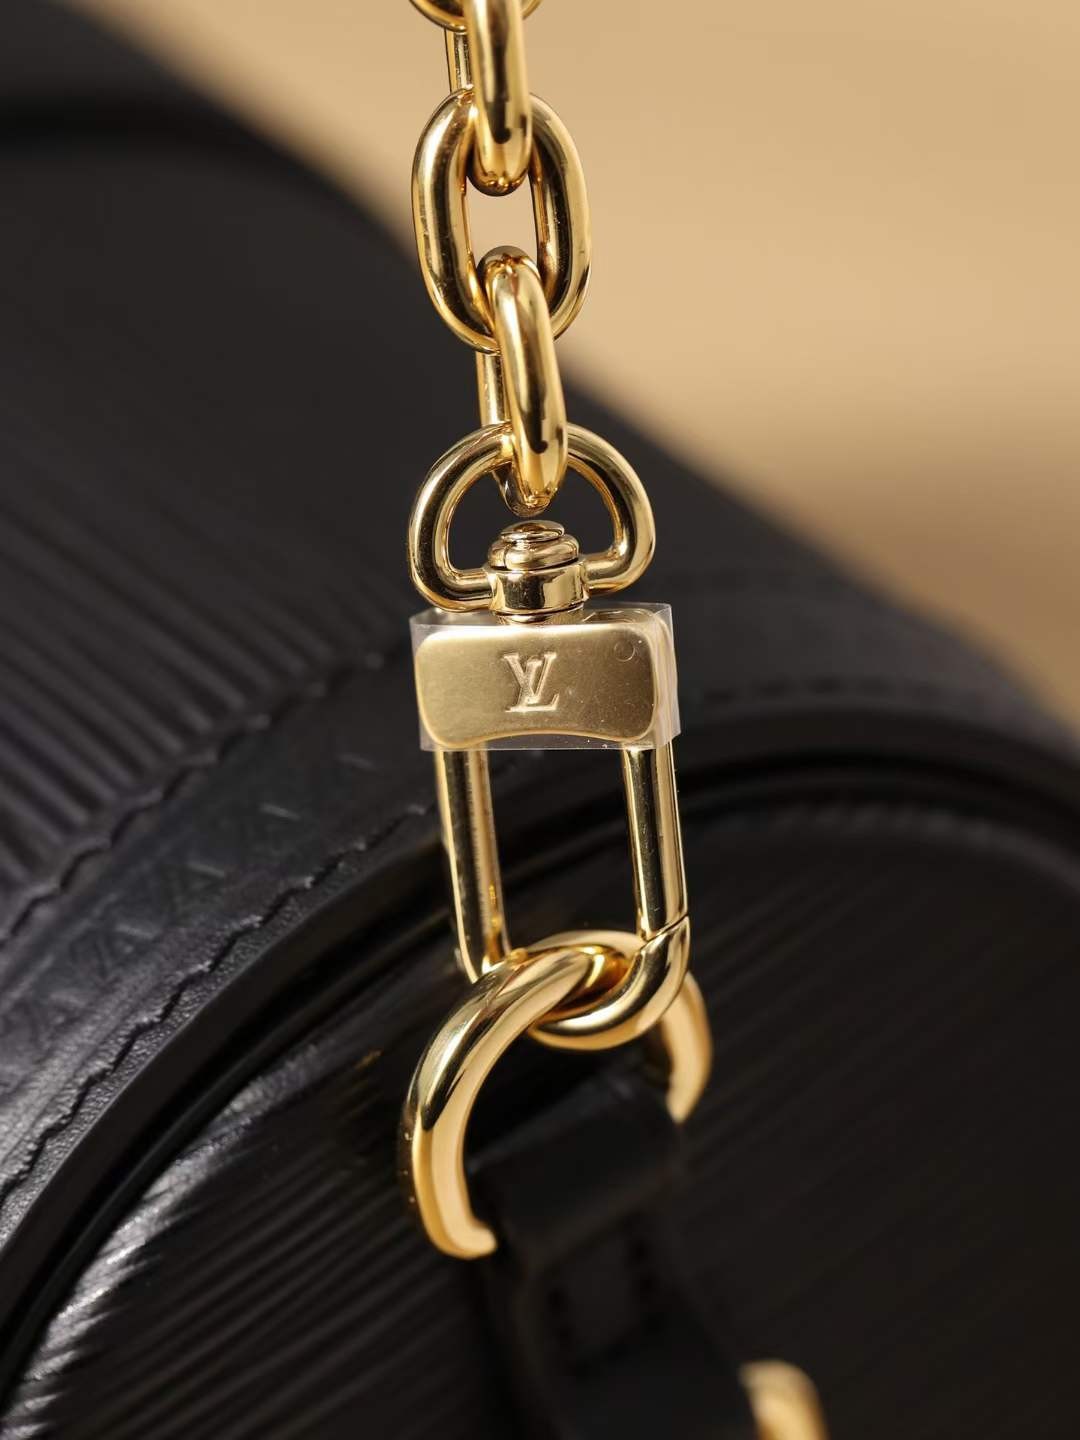 Louis Vuitton M58655 Papillon Trunk top replica bags, exclusive channel goods overall details (2022 Special)-Best Quality Fake designer Bag Review, Replica designer bag ru